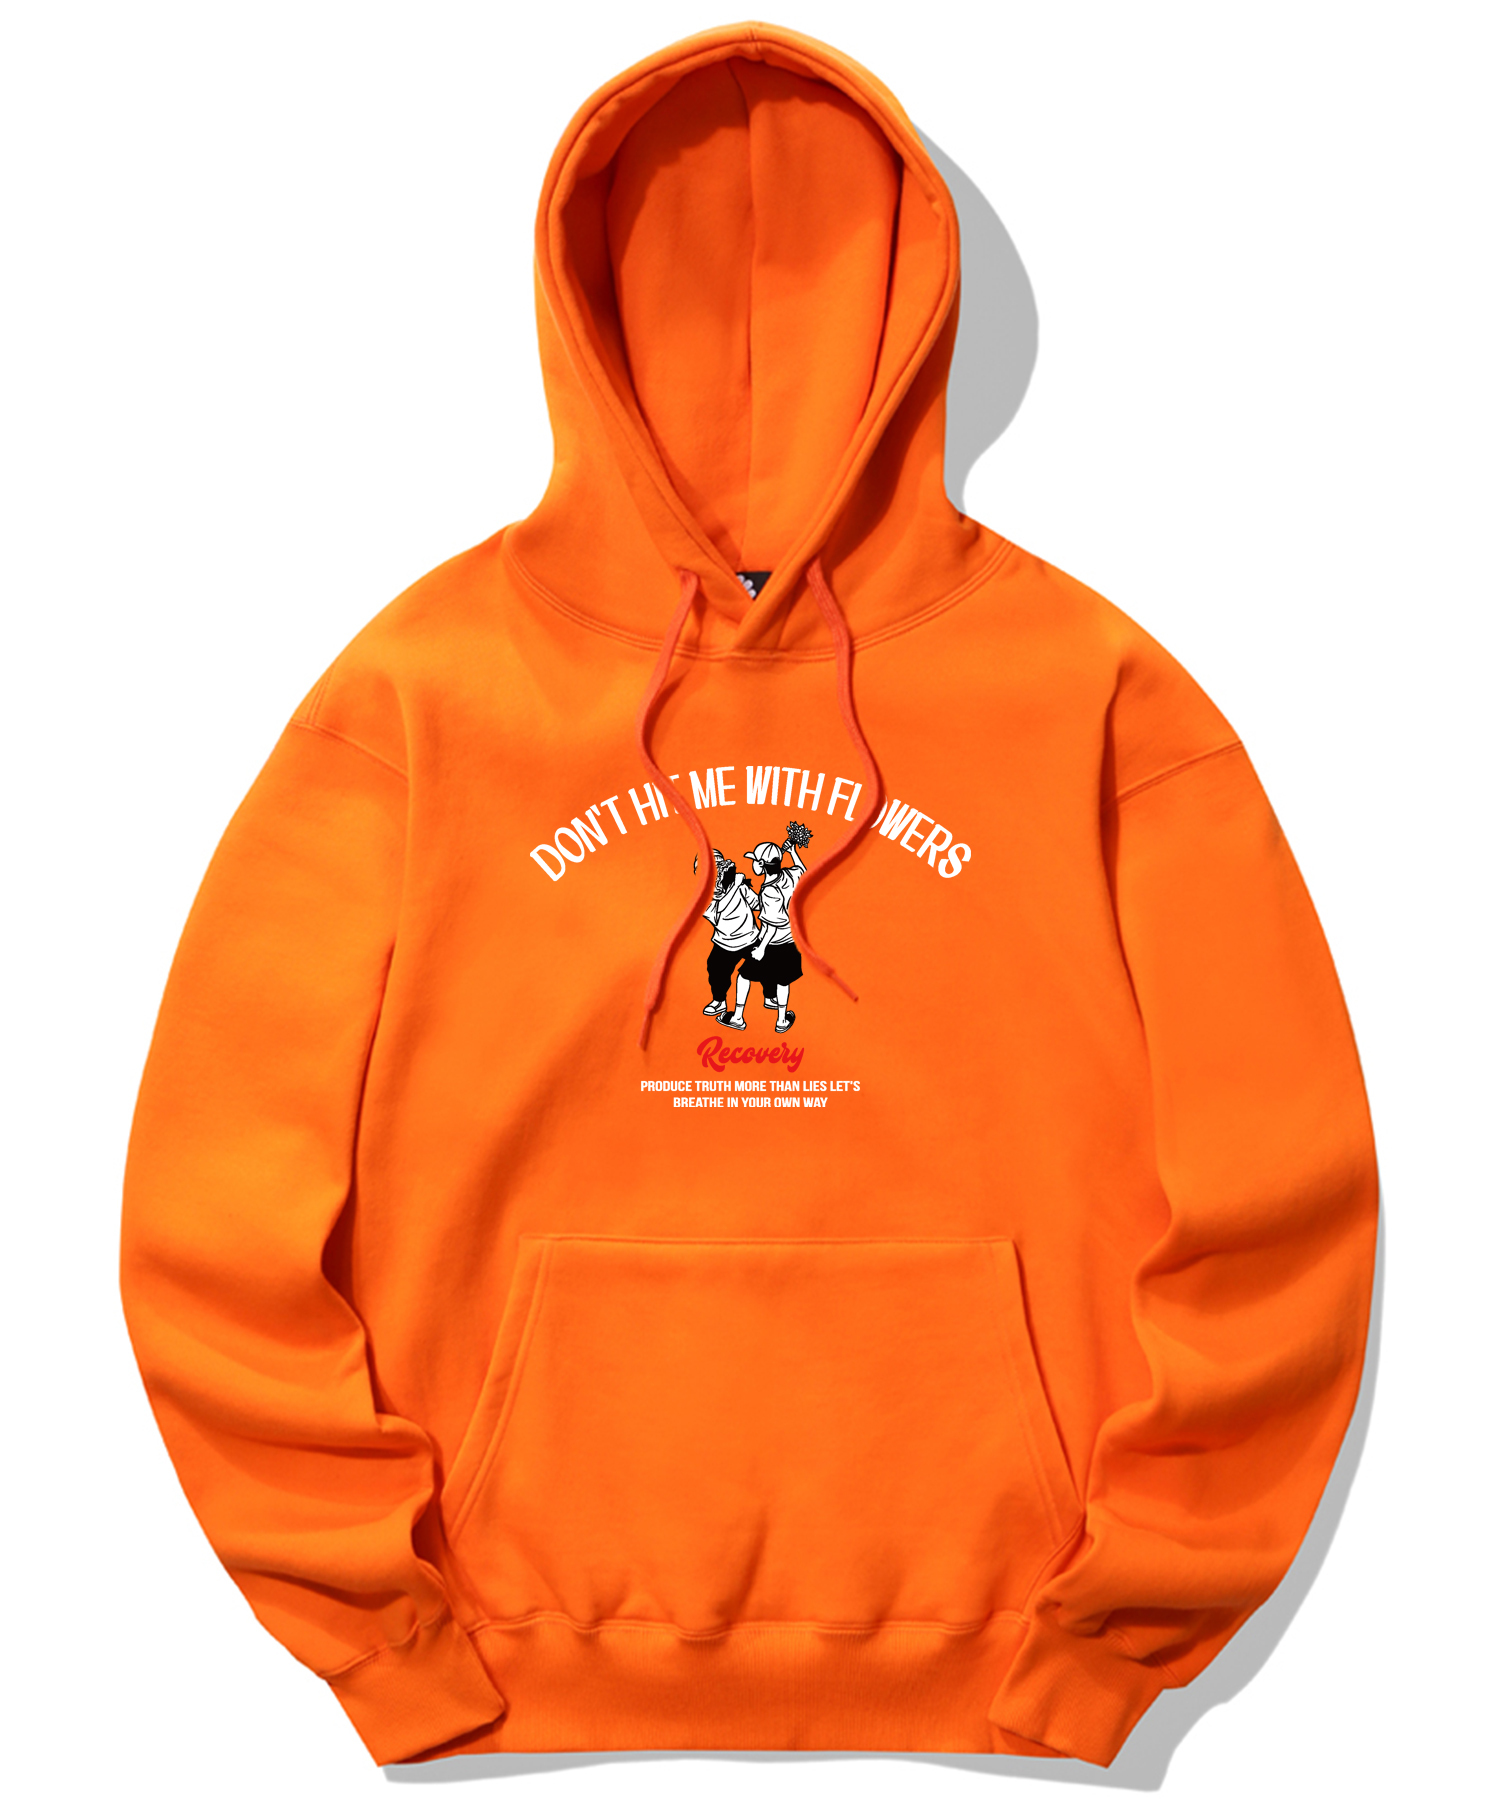 DON’T HIT ME WITH FLOWERS GRAPHIC HOODIE - ORANGE